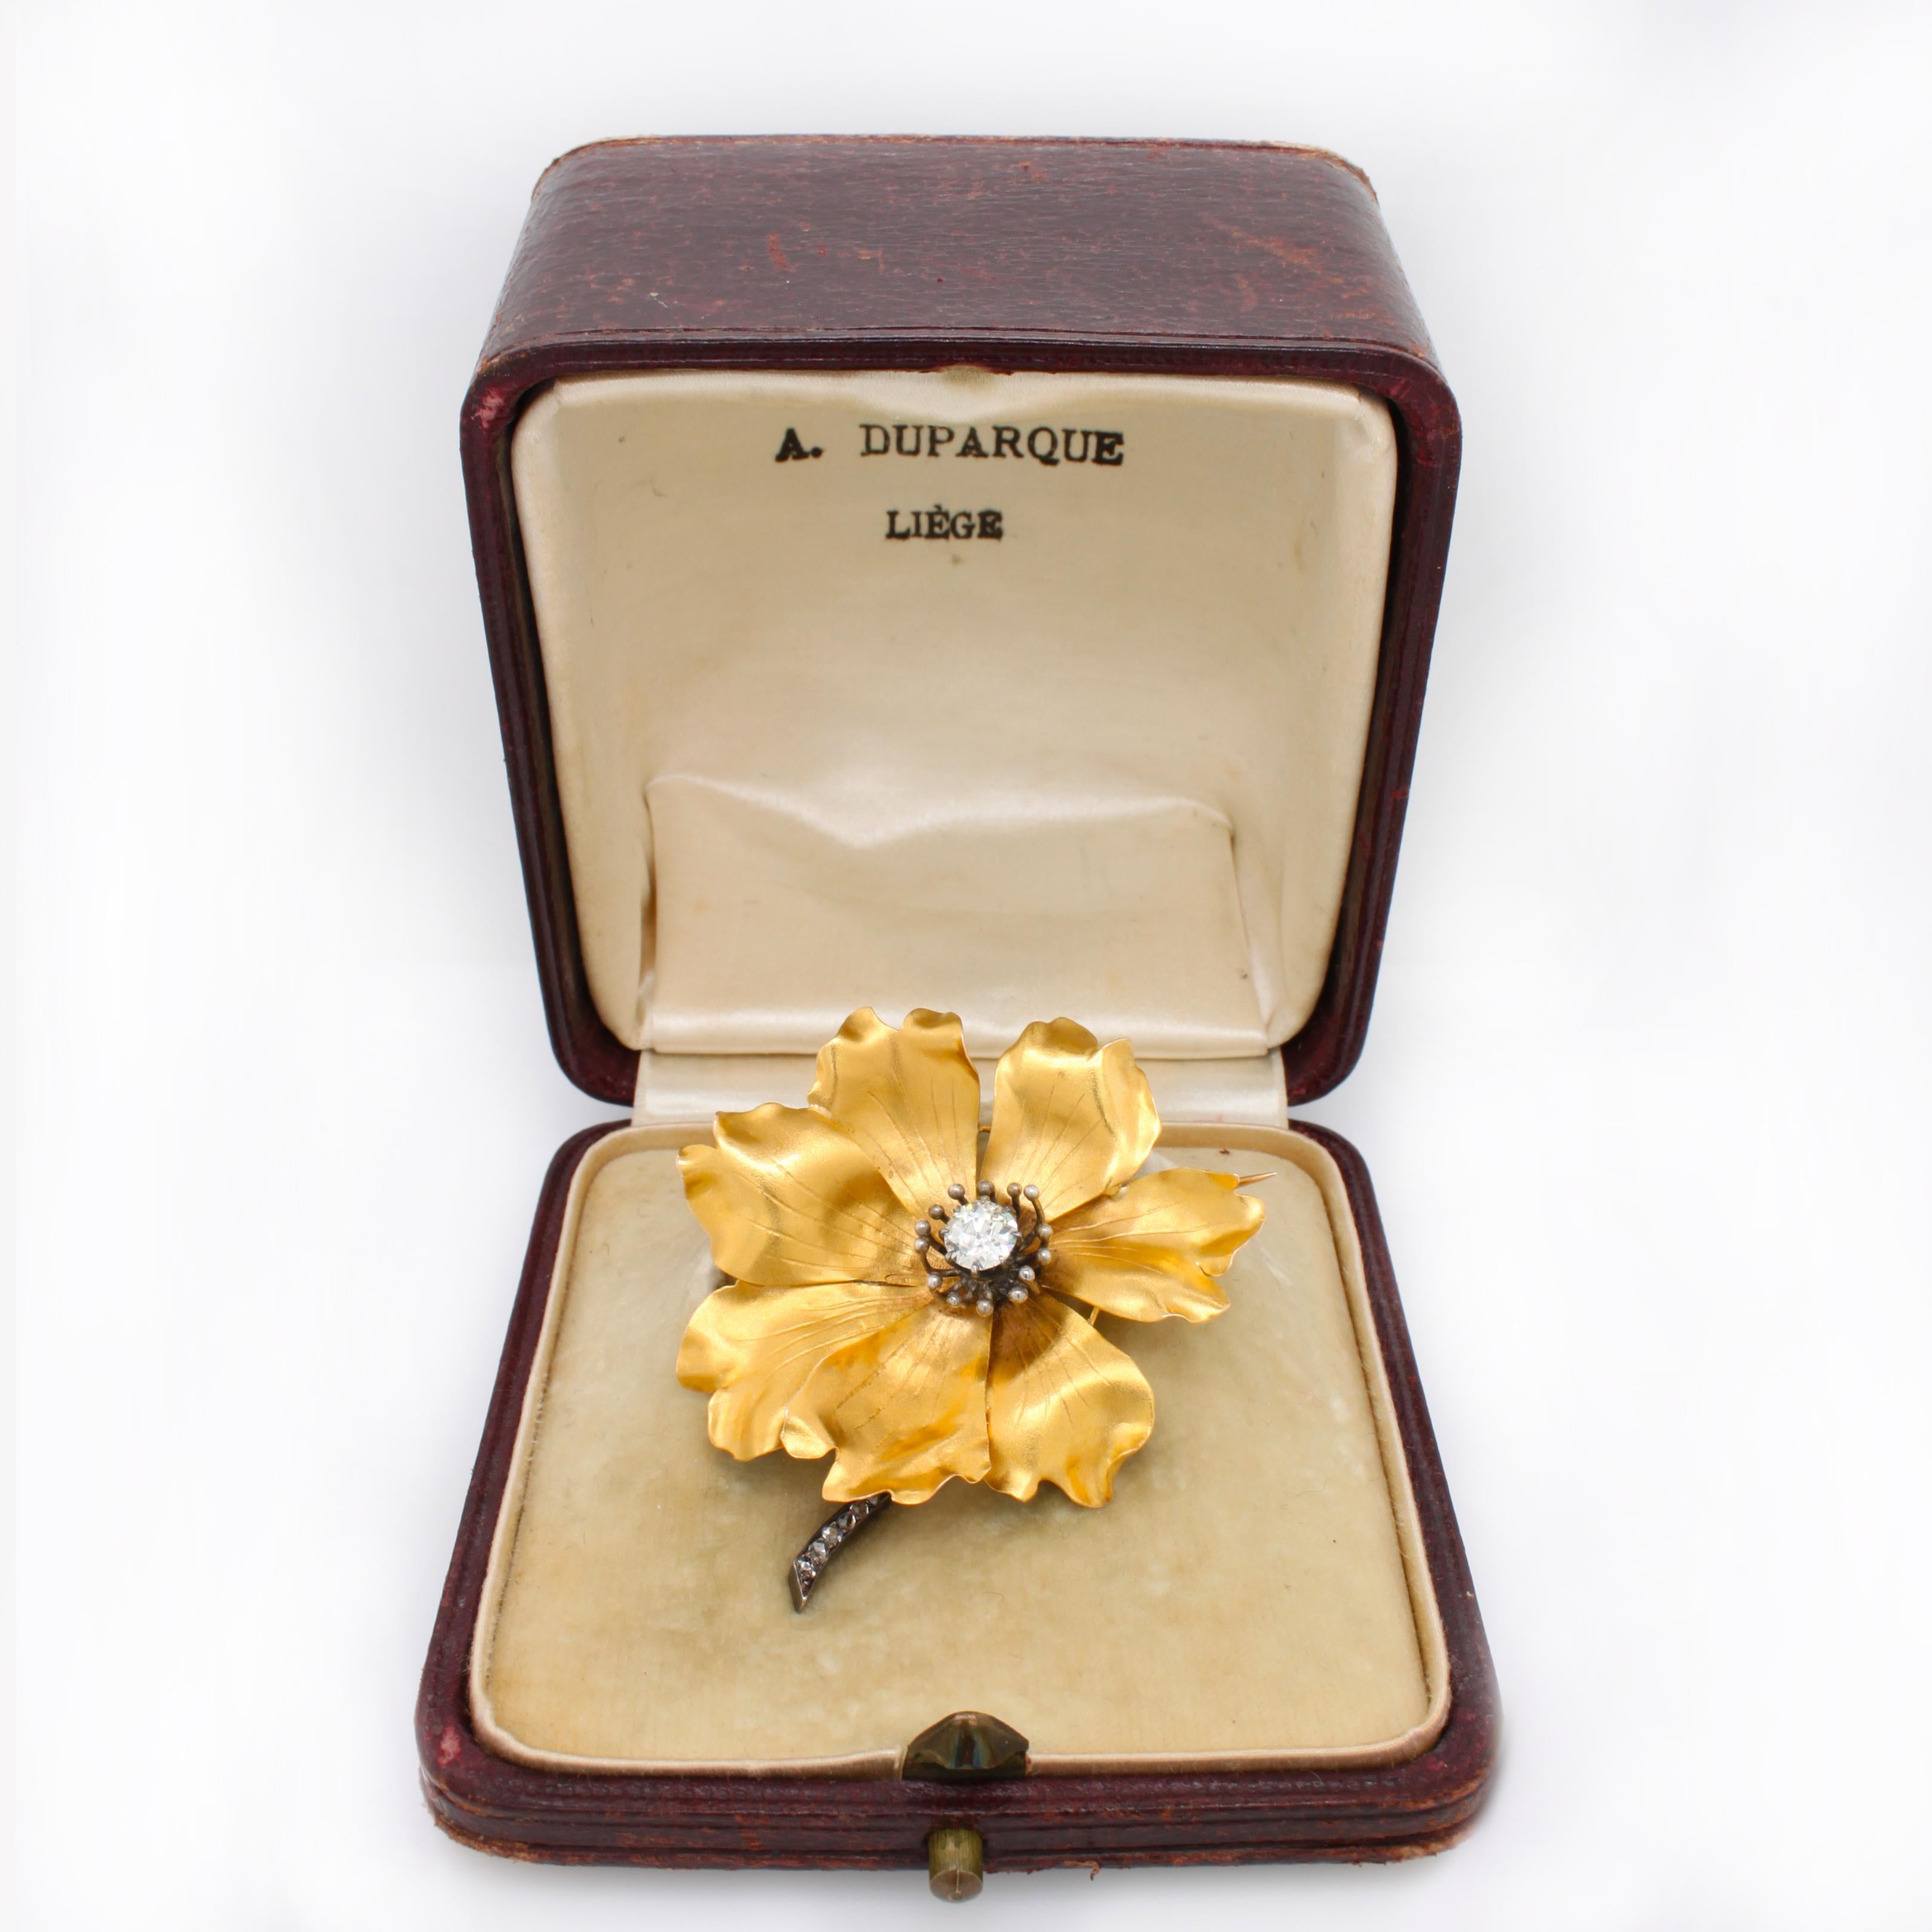 A French gold and diamond peony flower brooch with exceptional goldsmithing craftsmanship, ca. 1900.

The overall impression and feel of this brooch is absolute and real. All elements come together to showcase reality. Fine sheets of gold were used